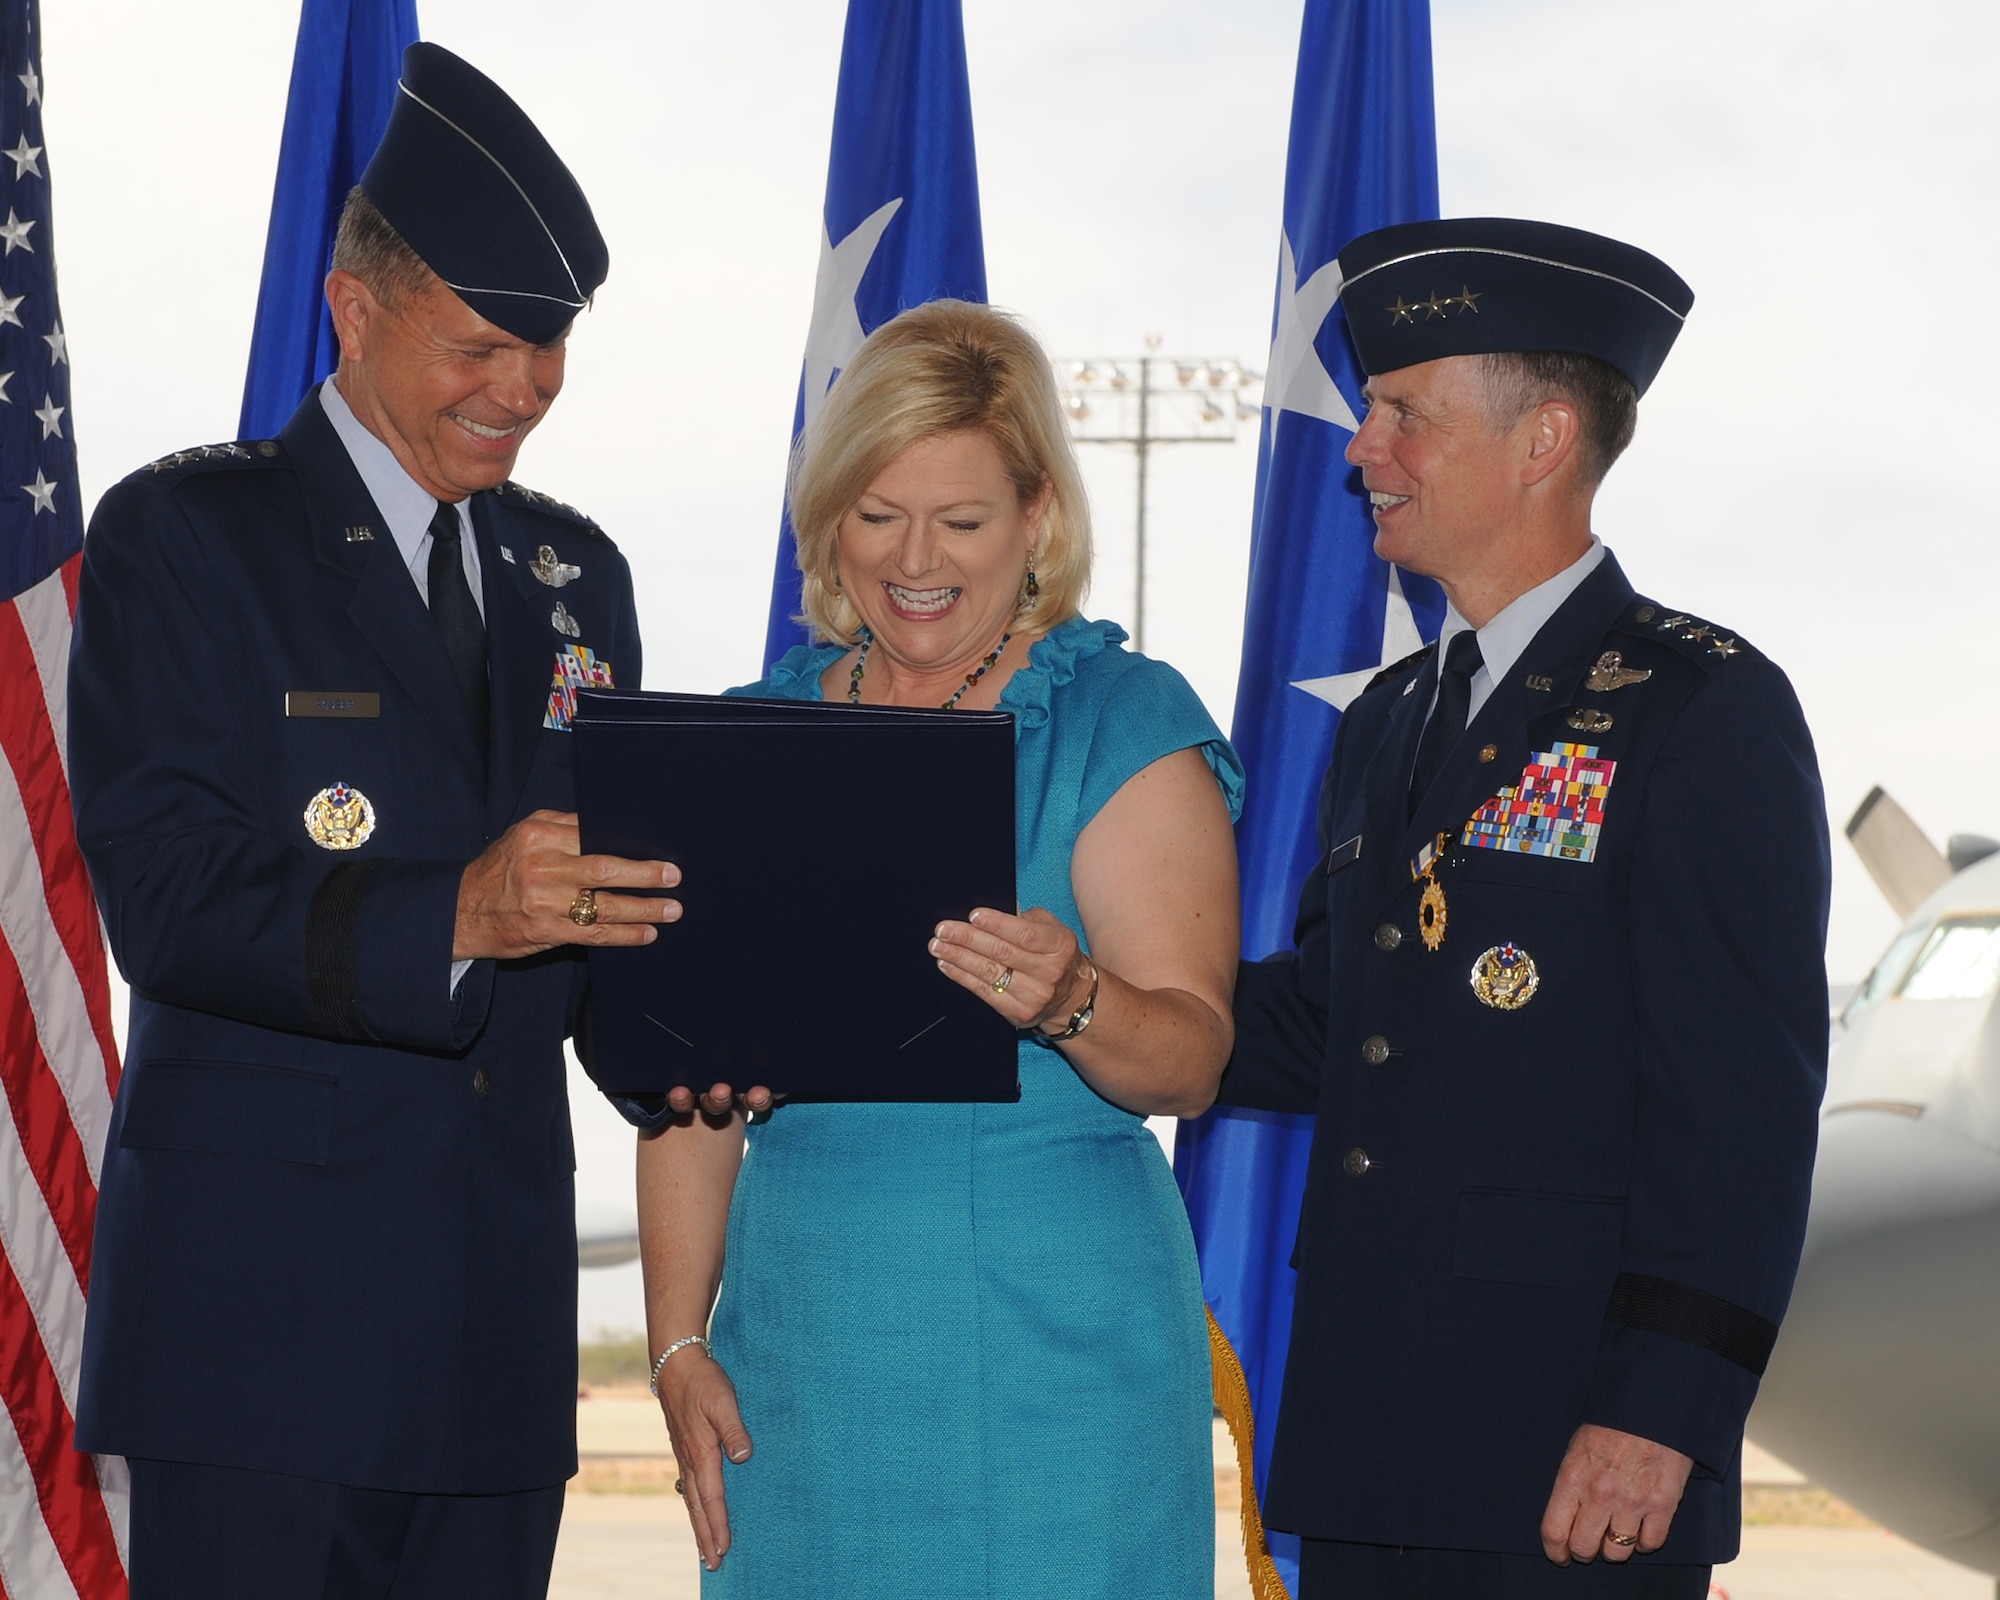 General William Fraser III (left), Air Combat Command commander, presents the Military Spouse Medal to Kim Spears, wife of Lt. Gen. Glenn Spears (right) during General Spears' retirement ceremony June 1 at Davis-Monthan Air Force Base, Ariz. (U.S. Air Force photo/Senior Airman Brittany Dowdle)